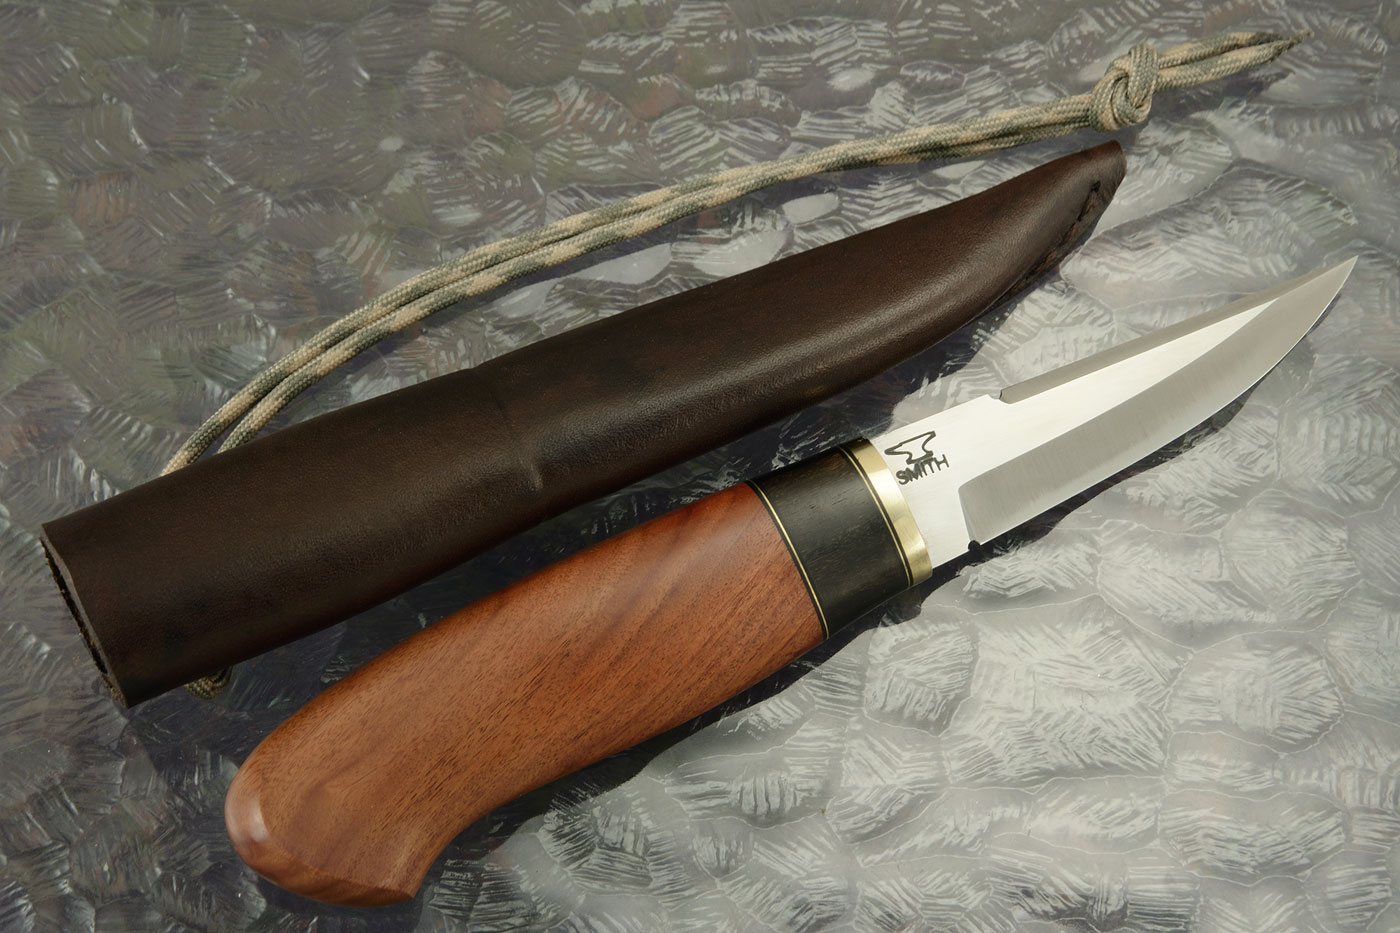 Hunter/Utility (Model S) with Mopane and African Blackwood